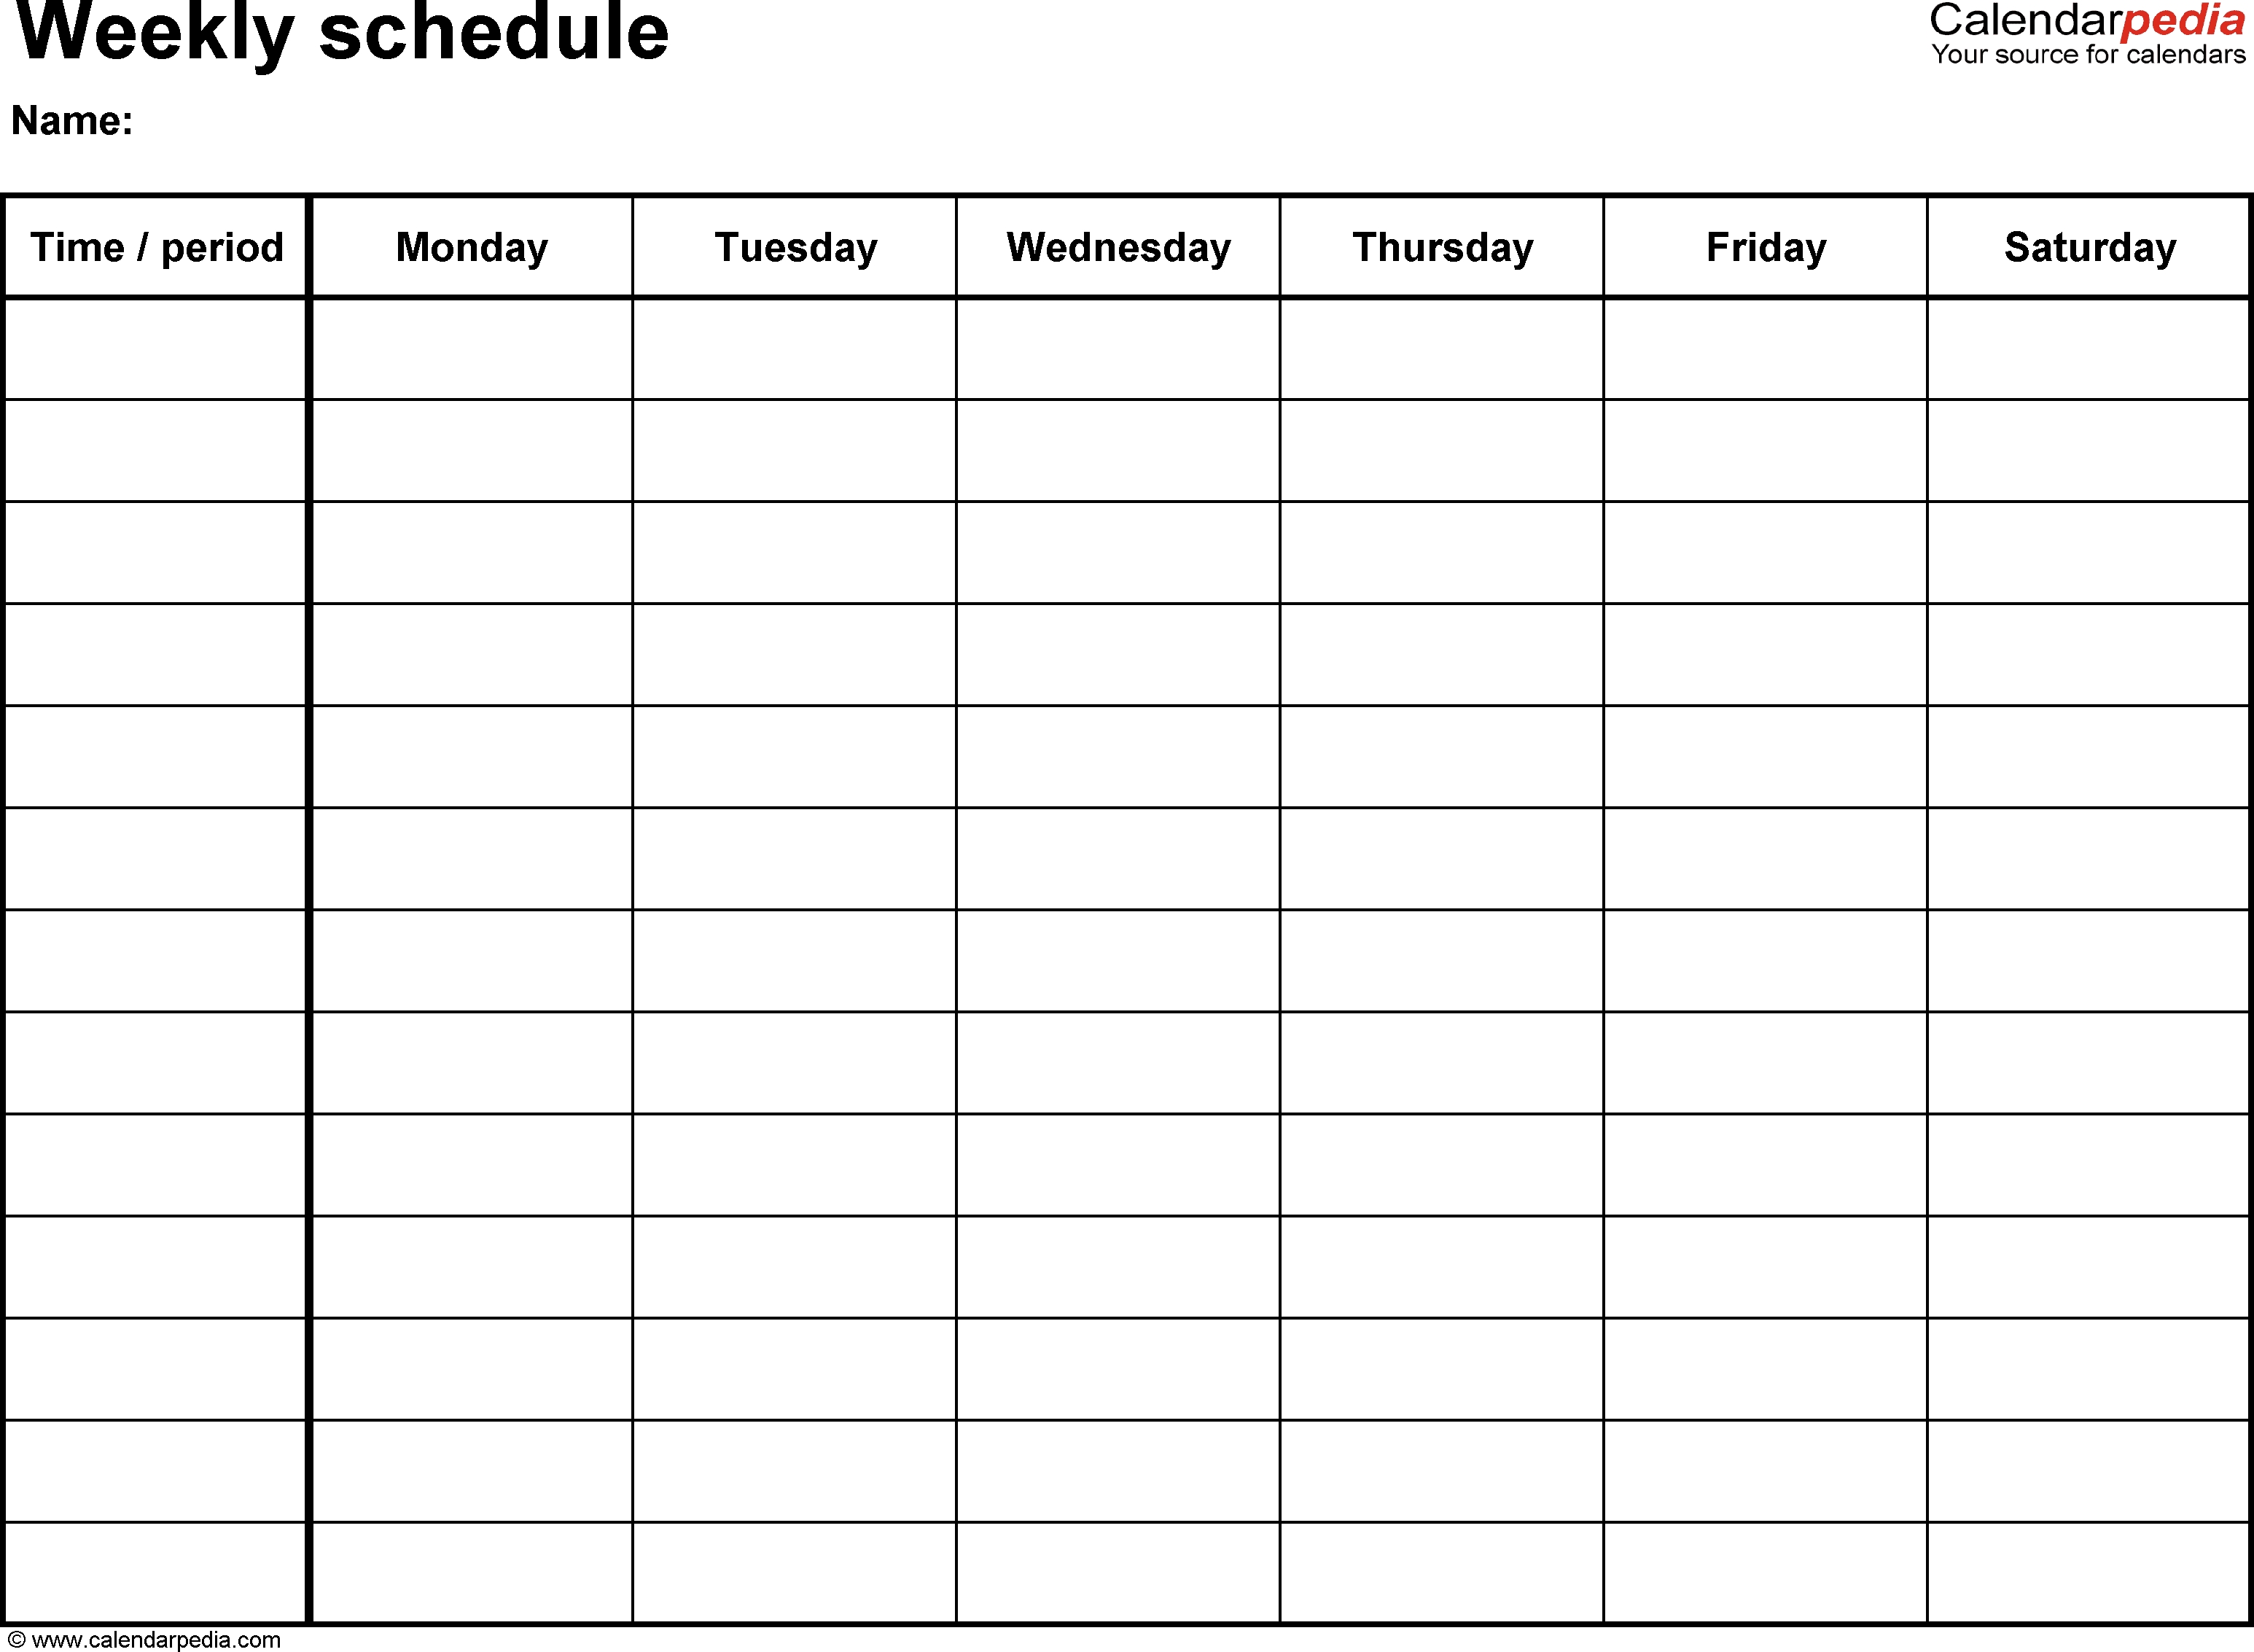 Free Weekly Schedule Templates For Excel - 18 Templates pertaining to Free Template For Weekly Schedule